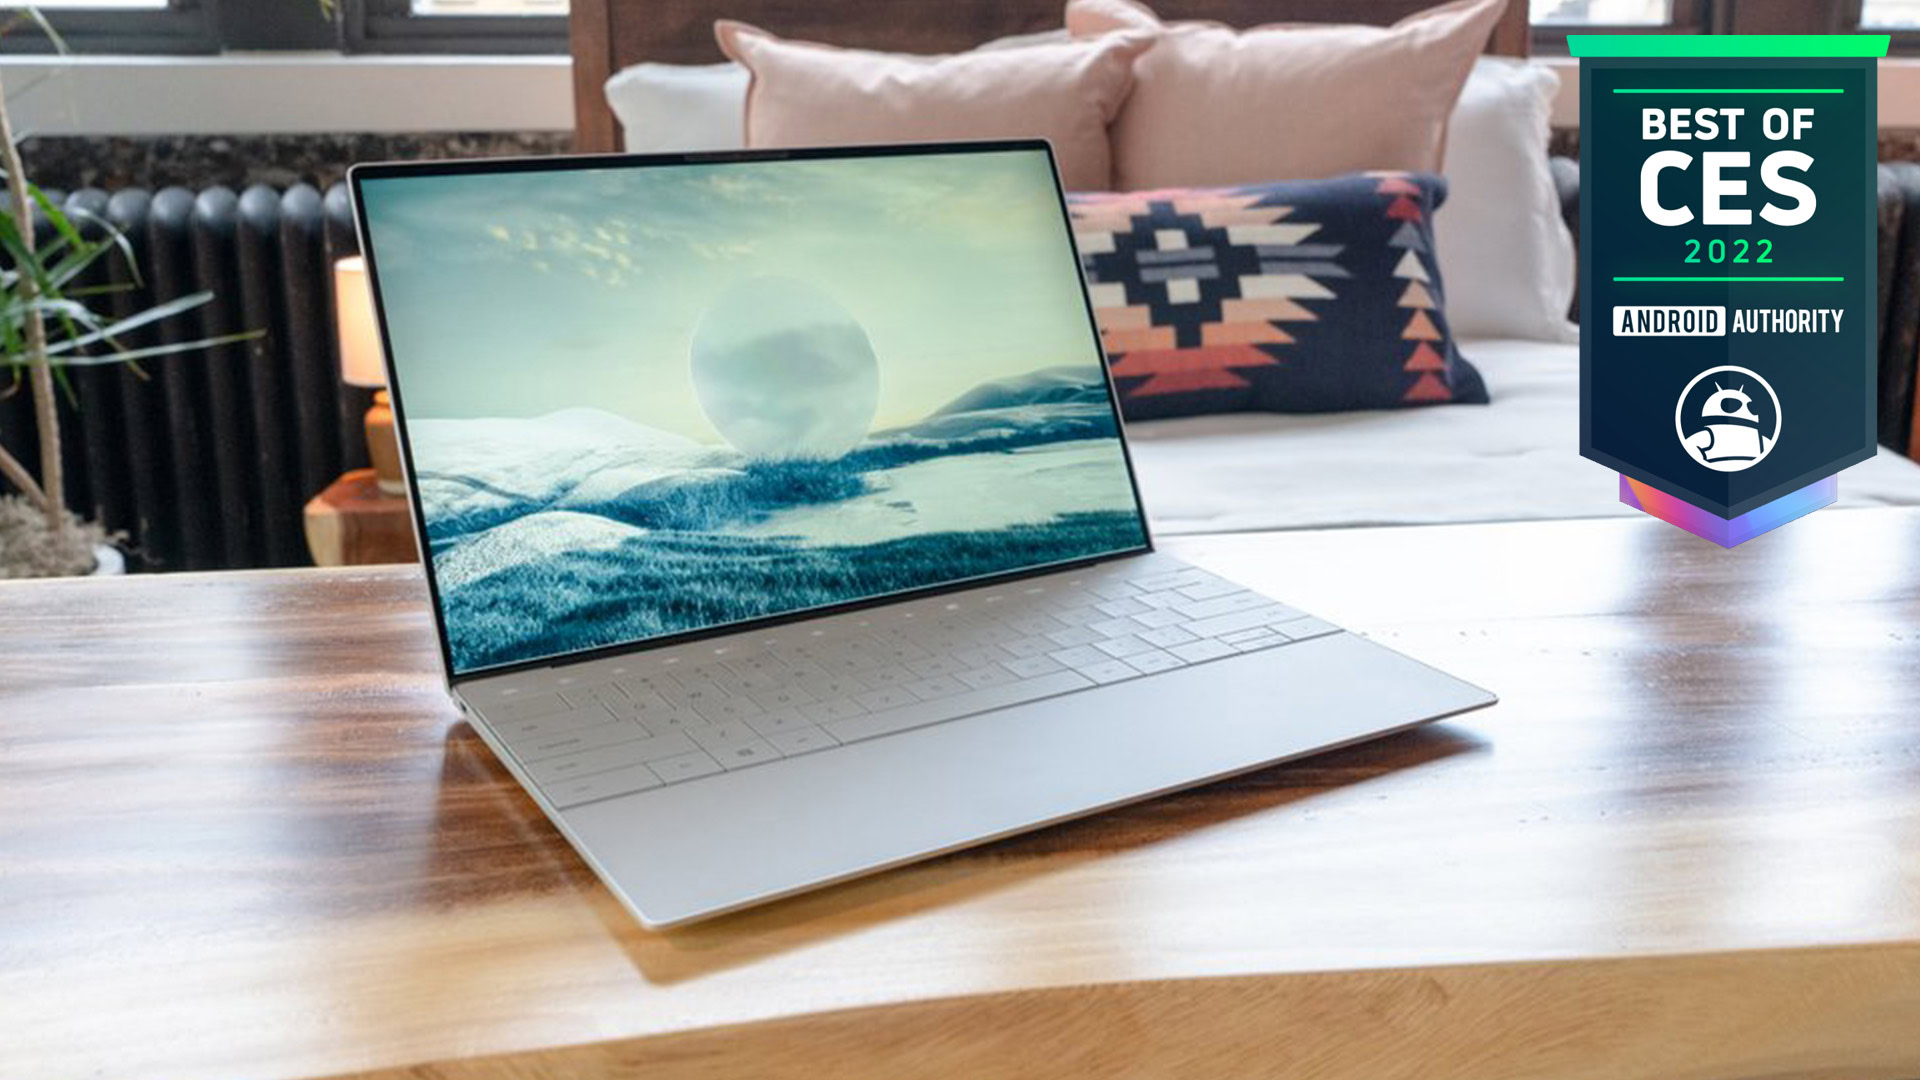 Dell XPS 13 Plus Android Authority Best of CES 2022 Award winner